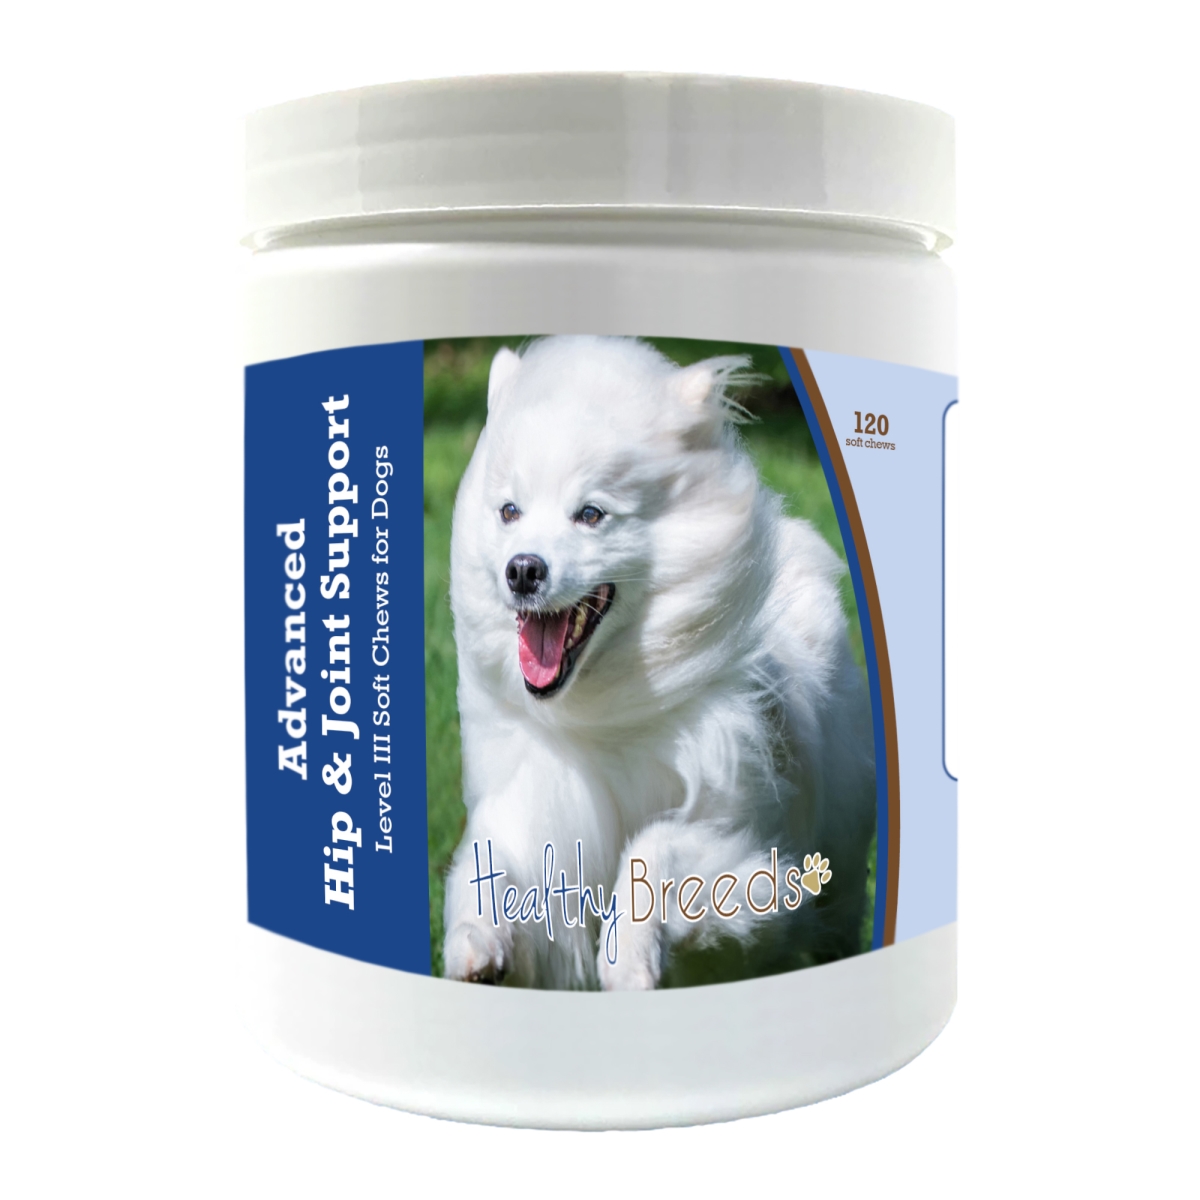 Picture of Healthy Breeds 192959897388 American Eskimo Dog Advanced Hip & Joint Support Level III Soft Chews for Dogs